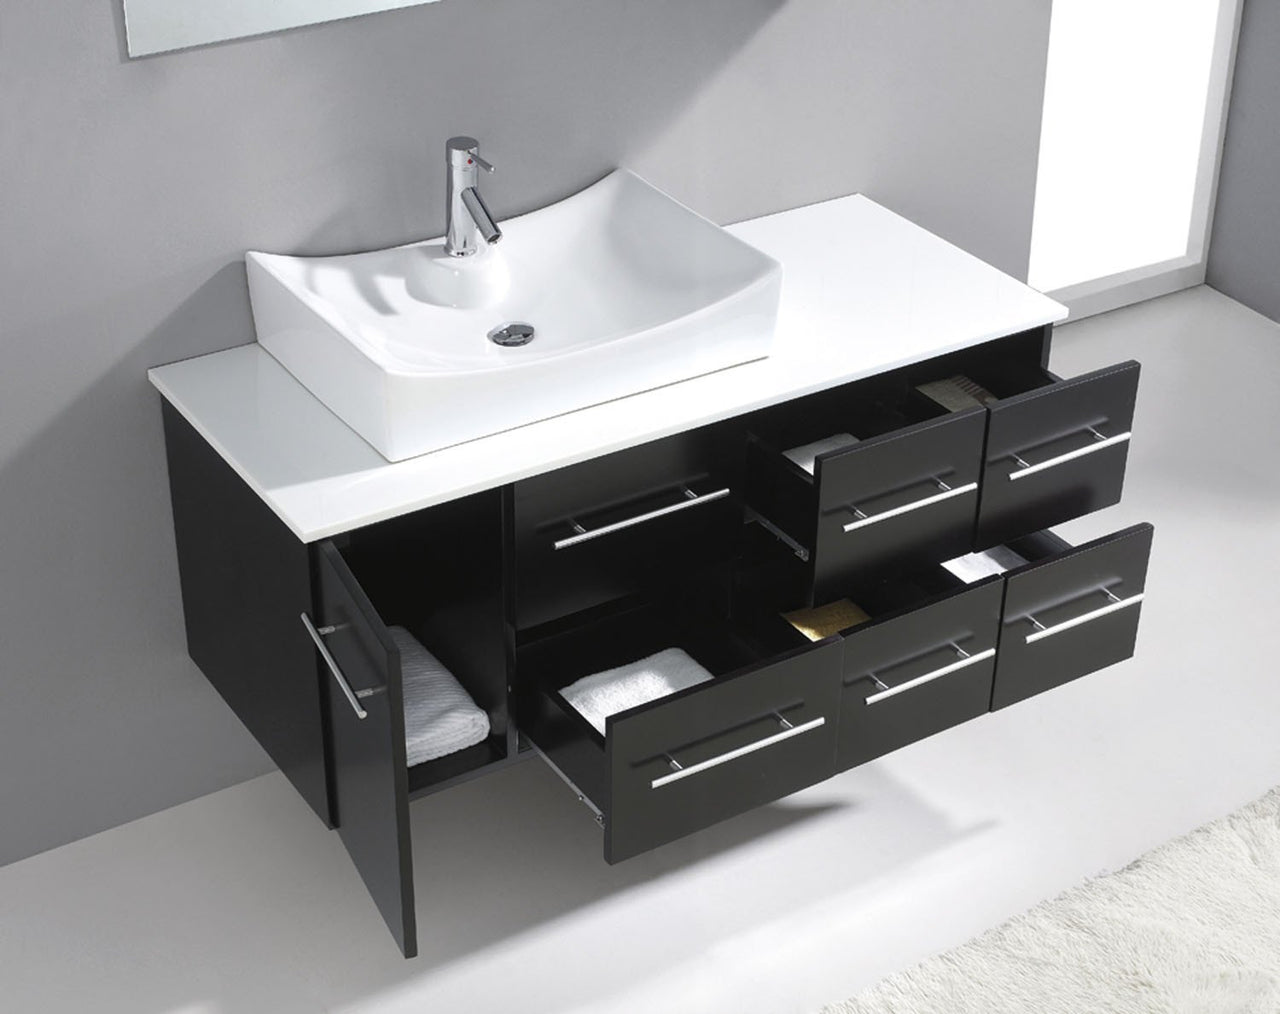 Virtu USA Ceanna 55" Single Square Sink Espresso Top Vanity in Espresso with Brushed Nickel Faucet and Mirror Vanity Virtu USA 